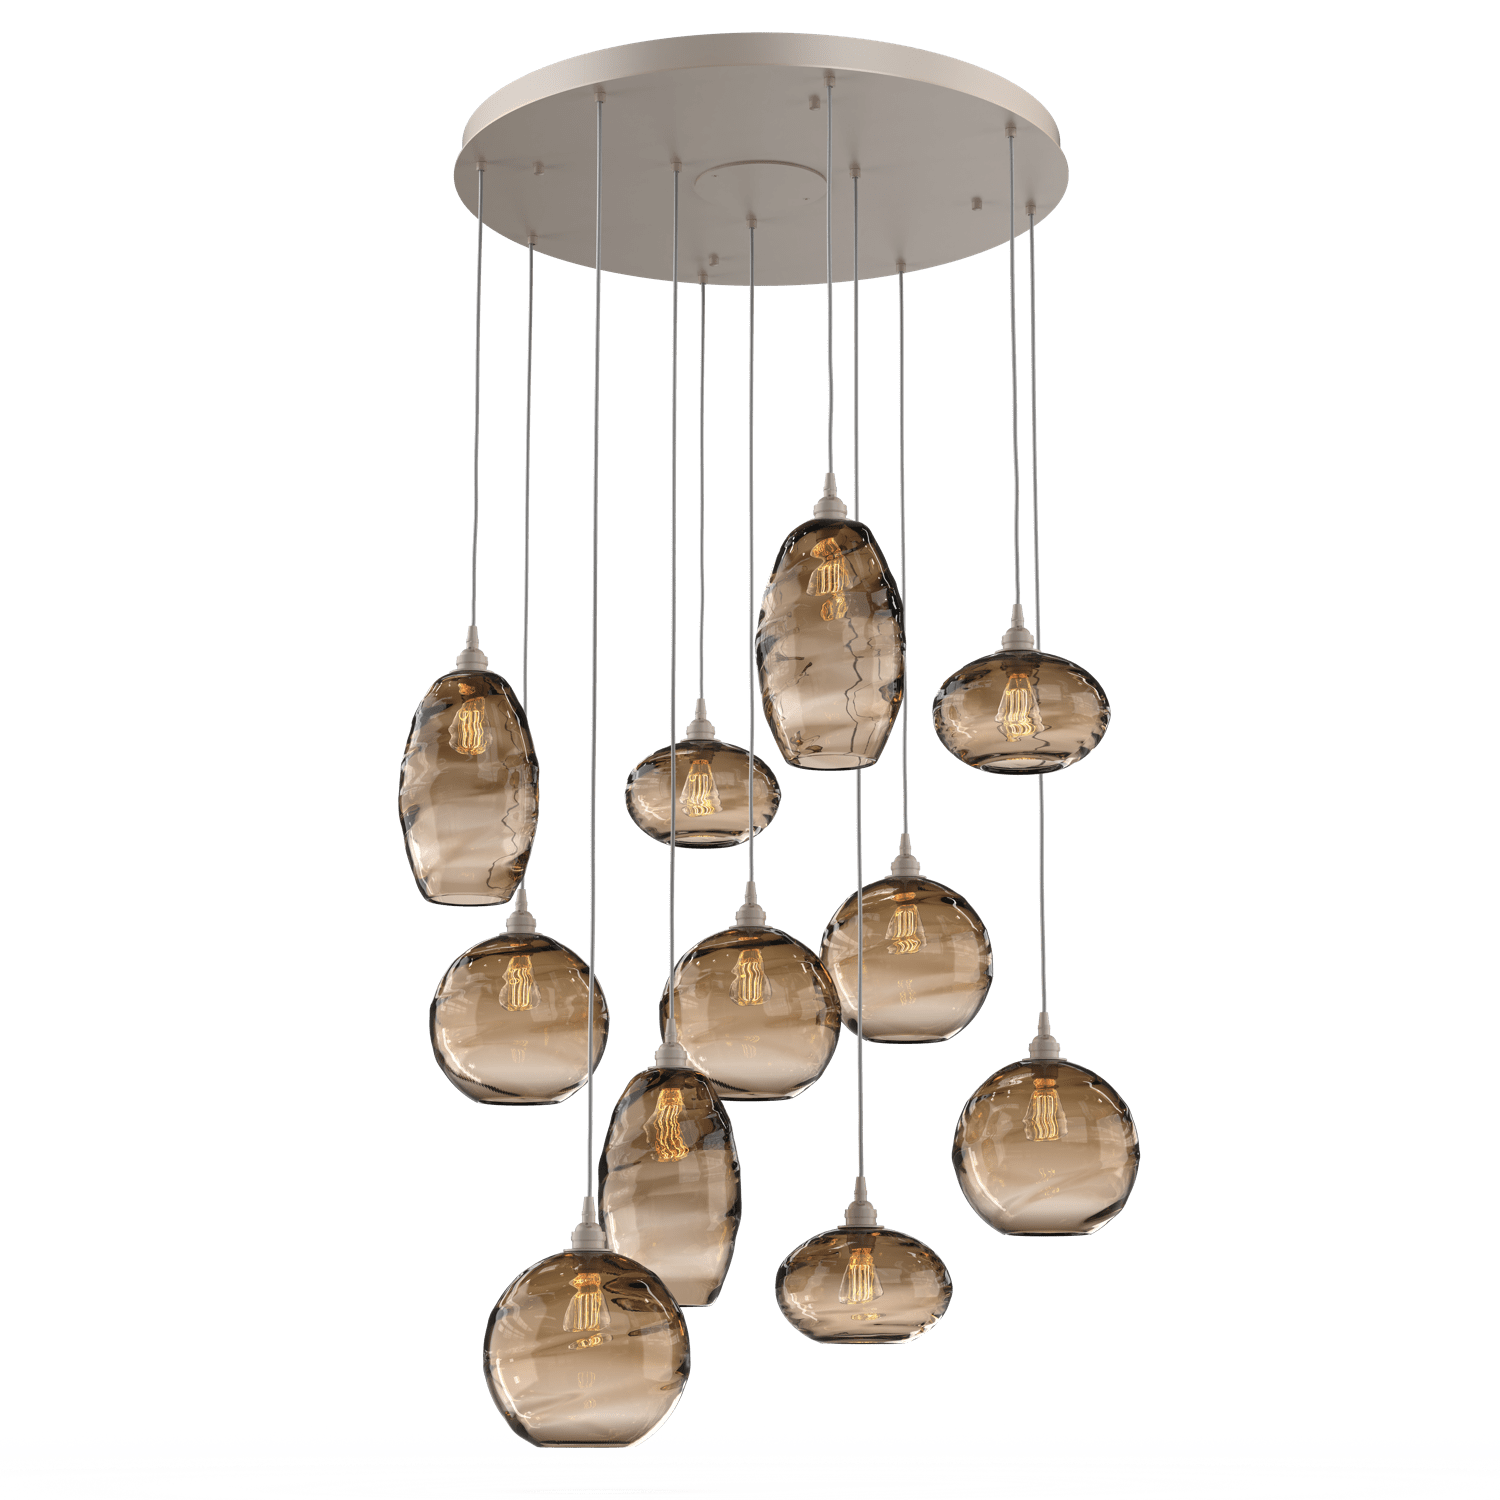 CHB0048-11-BS-OB-Hammerton-Studio-Optic-Blown-Glass-Misto-11-light-round-pendant-chandelier-with-metallic-beige-silver-finish-and-optic-bronze-blown-glass-shades-and-incandescent-lamping